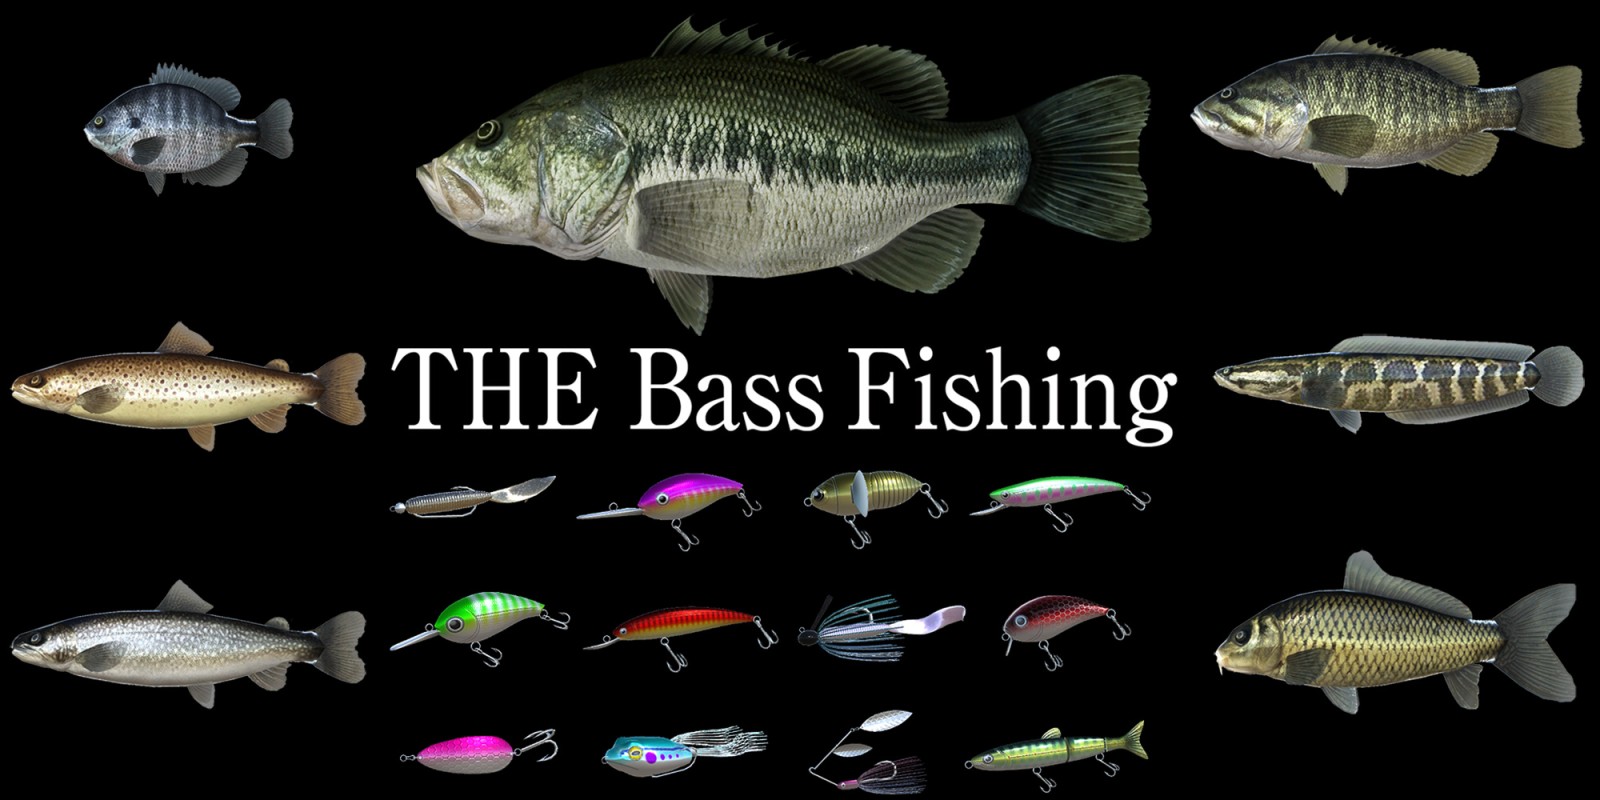 THE Bass Fishing, Nintendo Switch download software